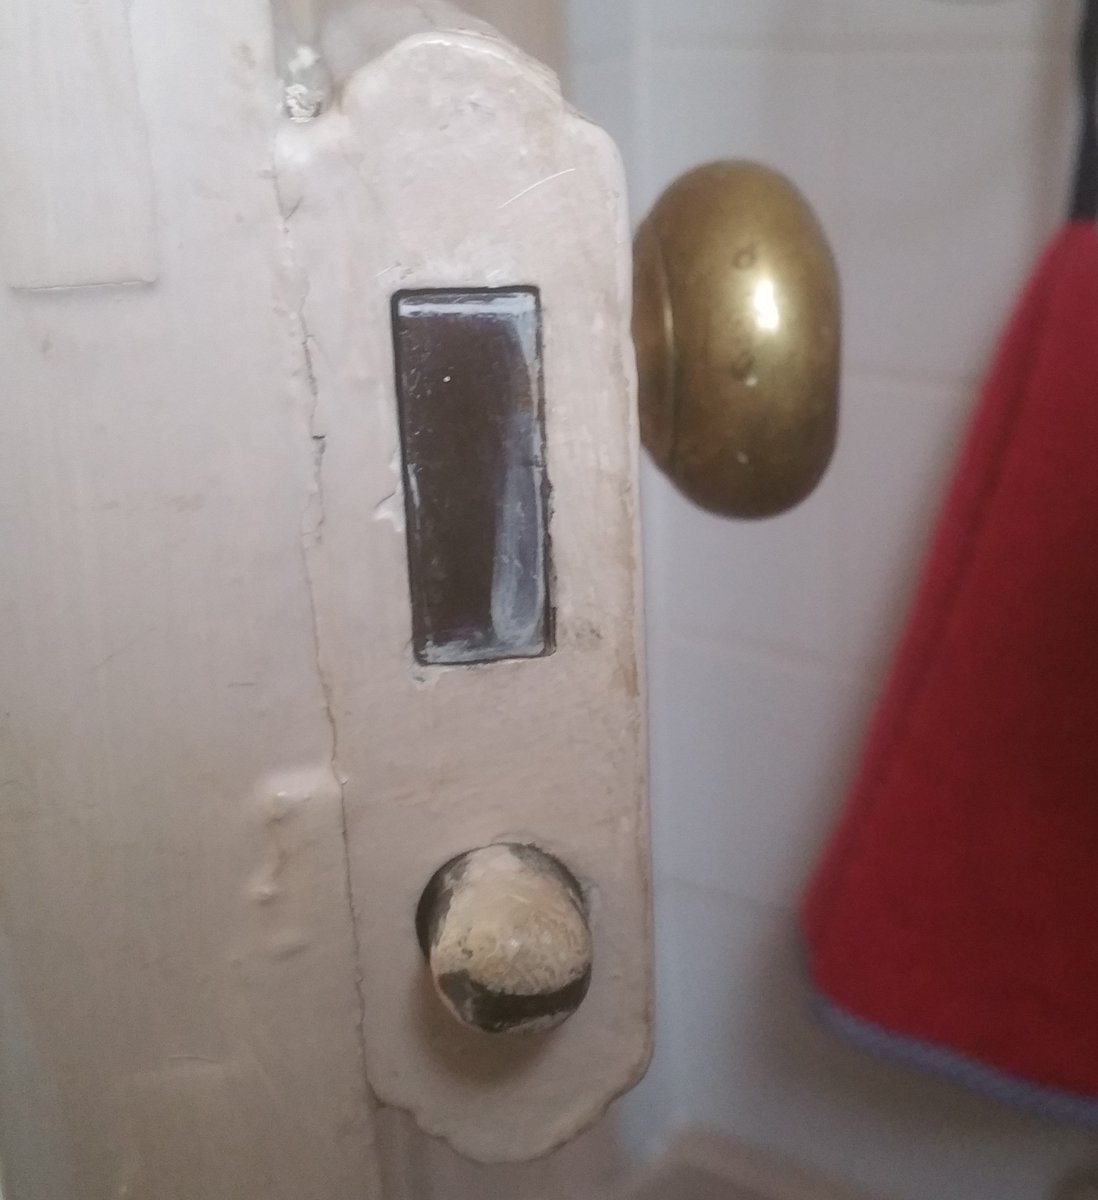 Had to open this jammed ye olde worlde rimlock today - never seen this type of latchbolt before. Wondered why it wouldn't mica. Normally they are wedge shaped, but this was a round ended bolt. Strangely no wholesalers are stocking this unit anymore! #locksmiths #noah #ark